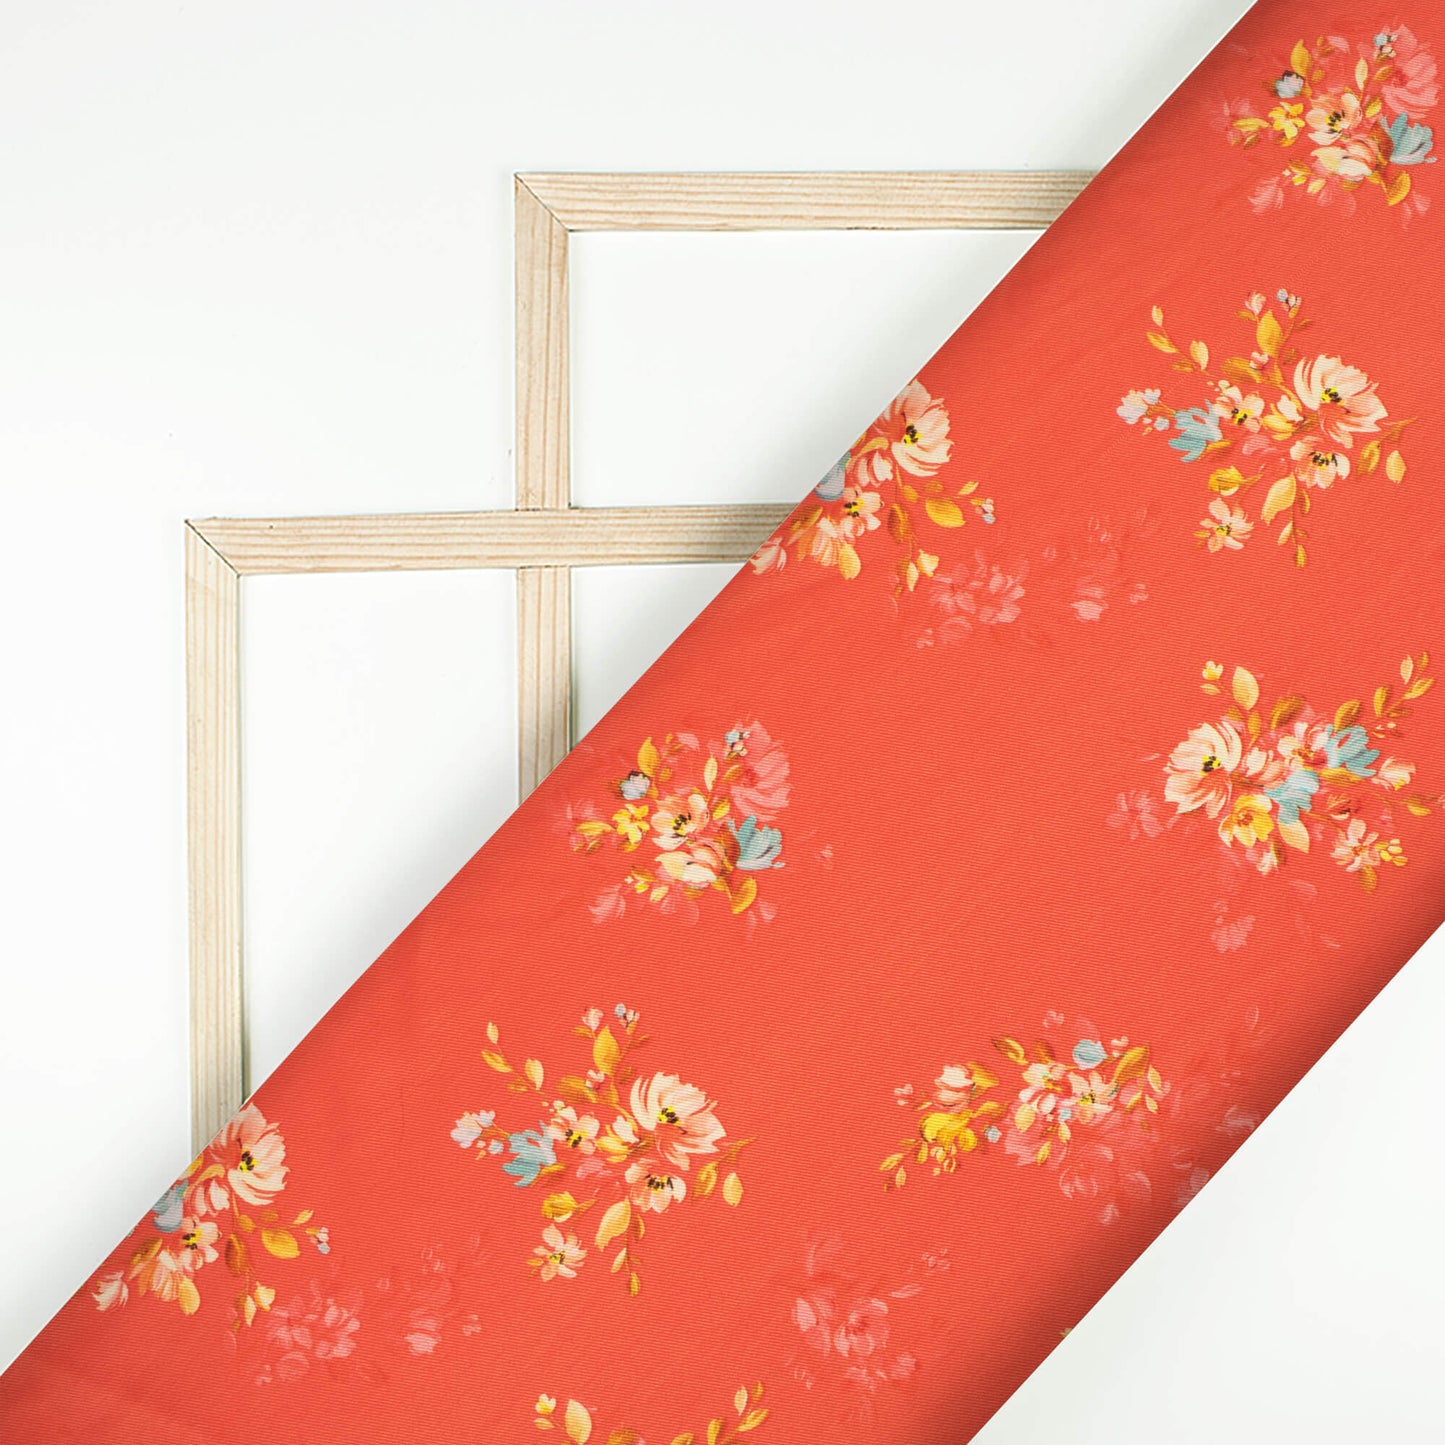 Vermilion Red And Peach Floral Pattern Digital Print Twill Fabric (Width 56 Inches)